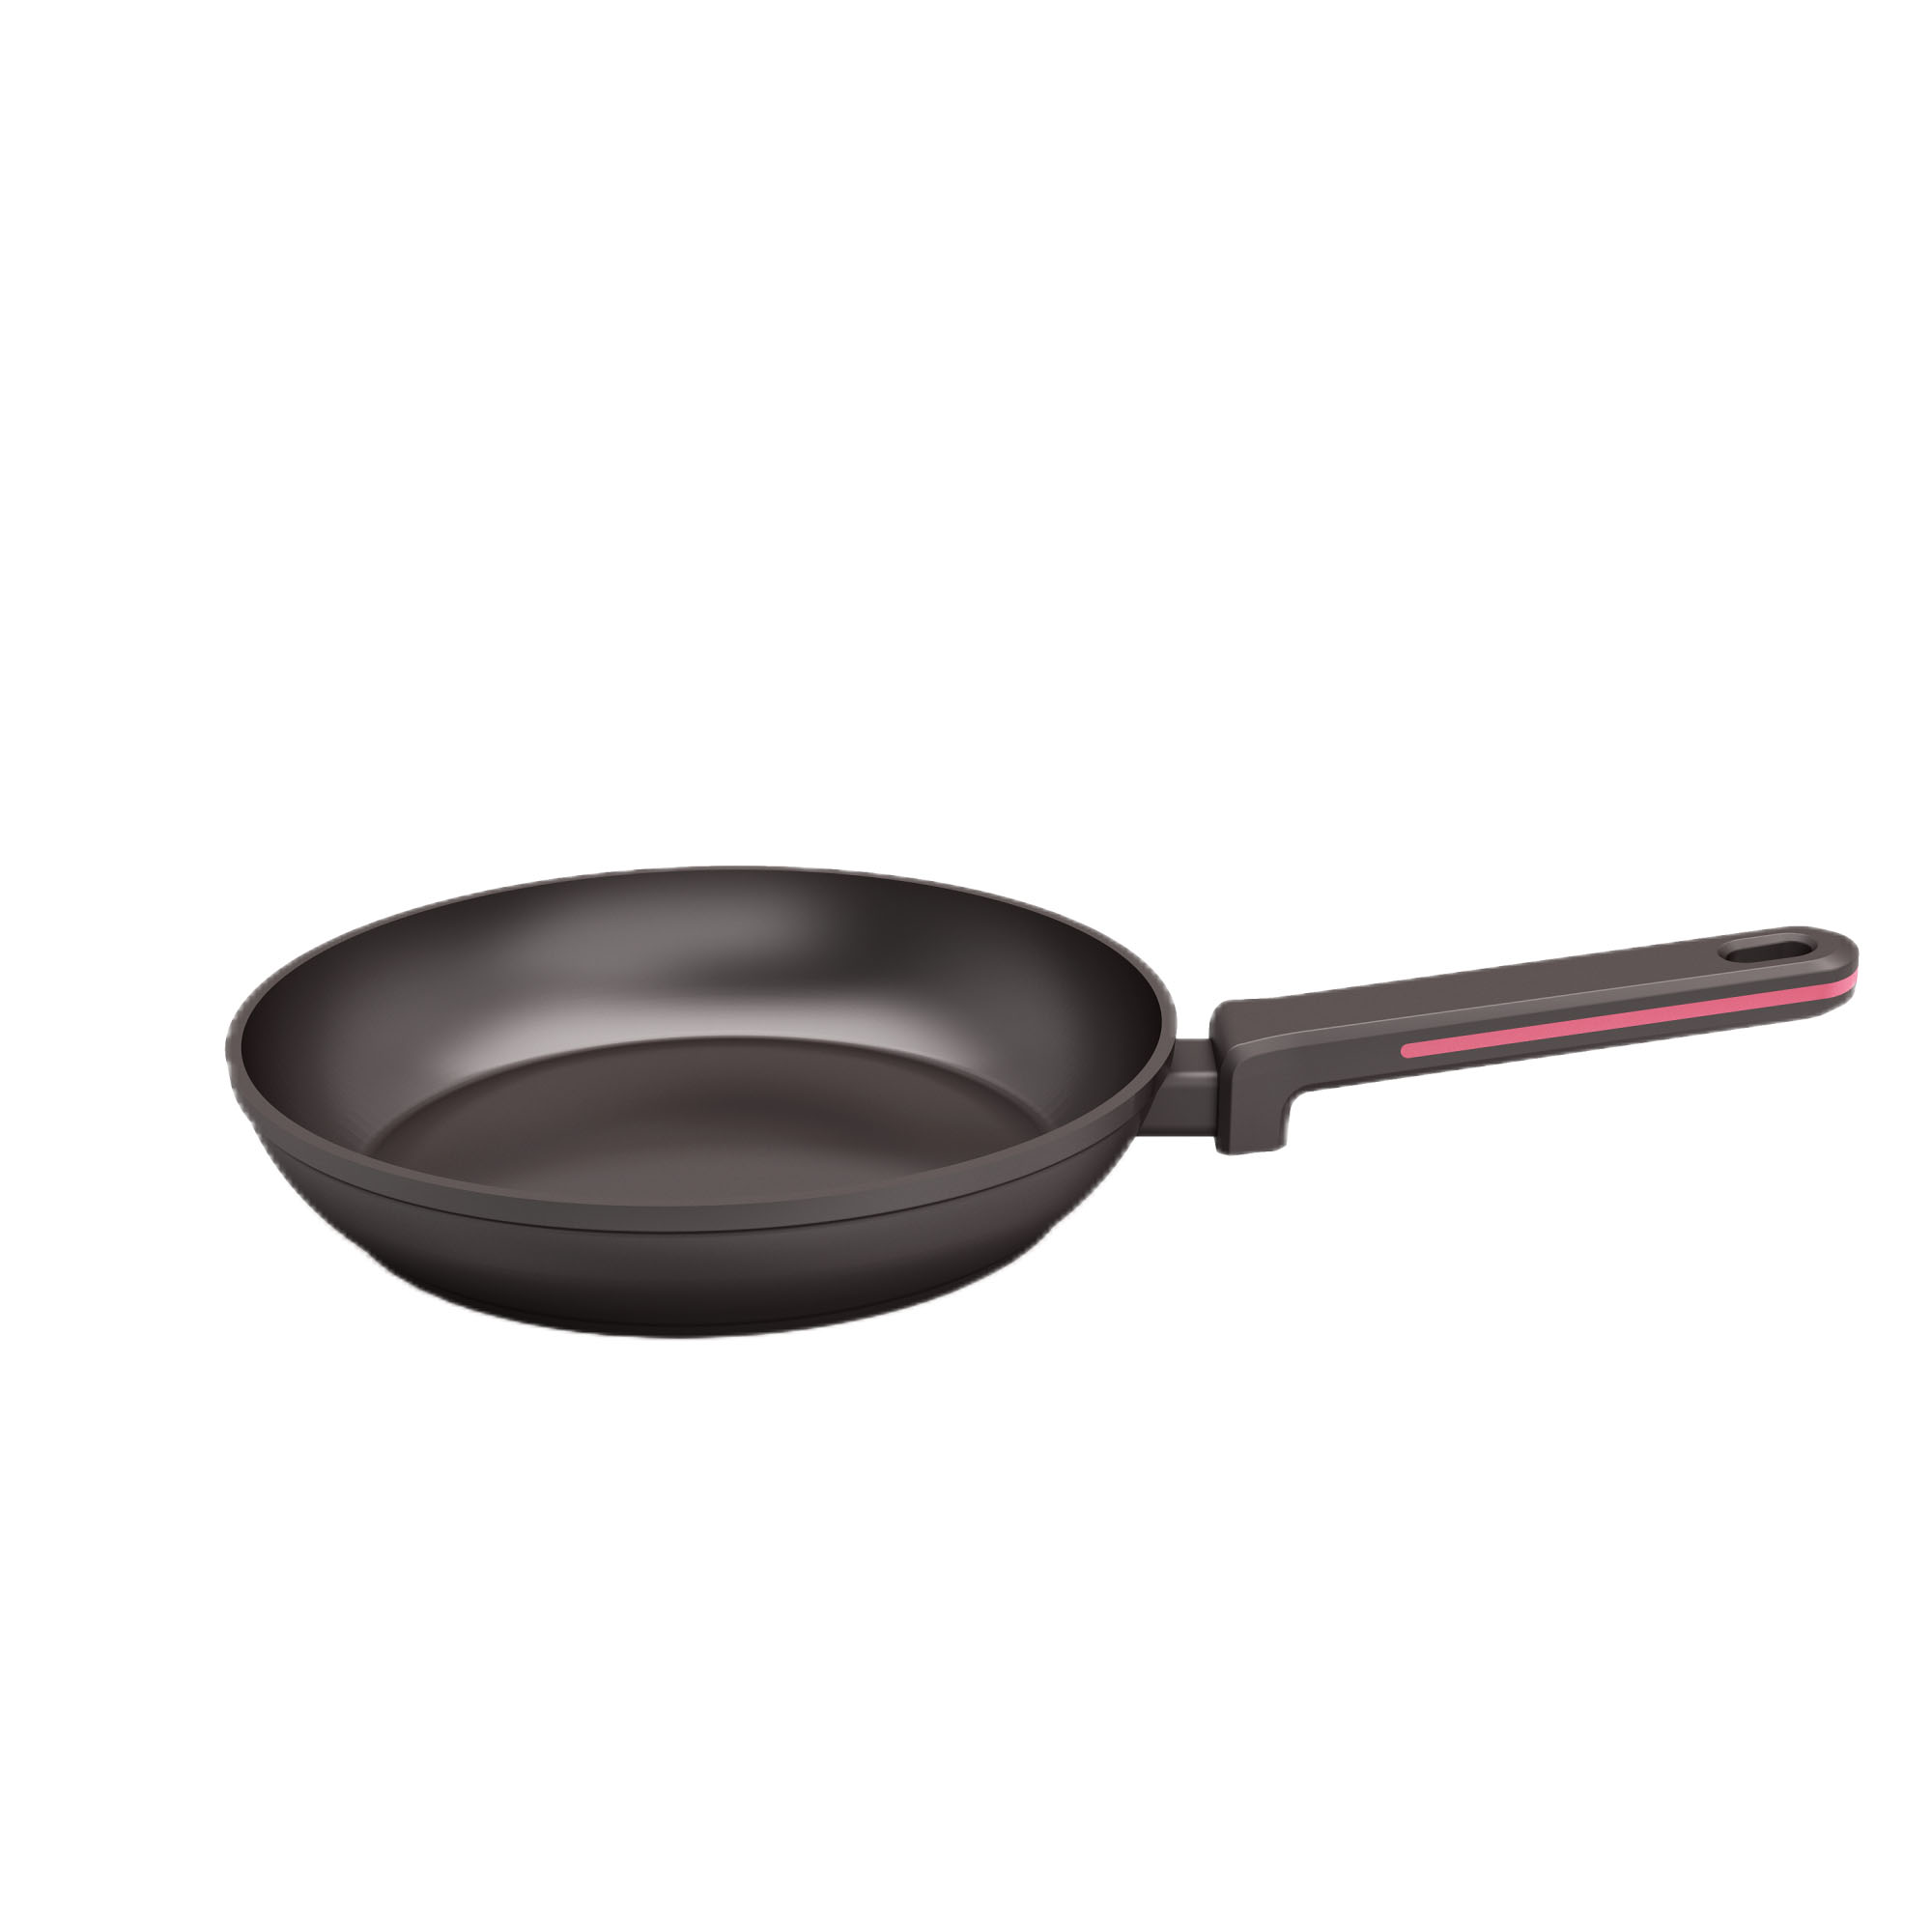 Marvel Range Non-stick Cookware Aluminum Forged Frypan